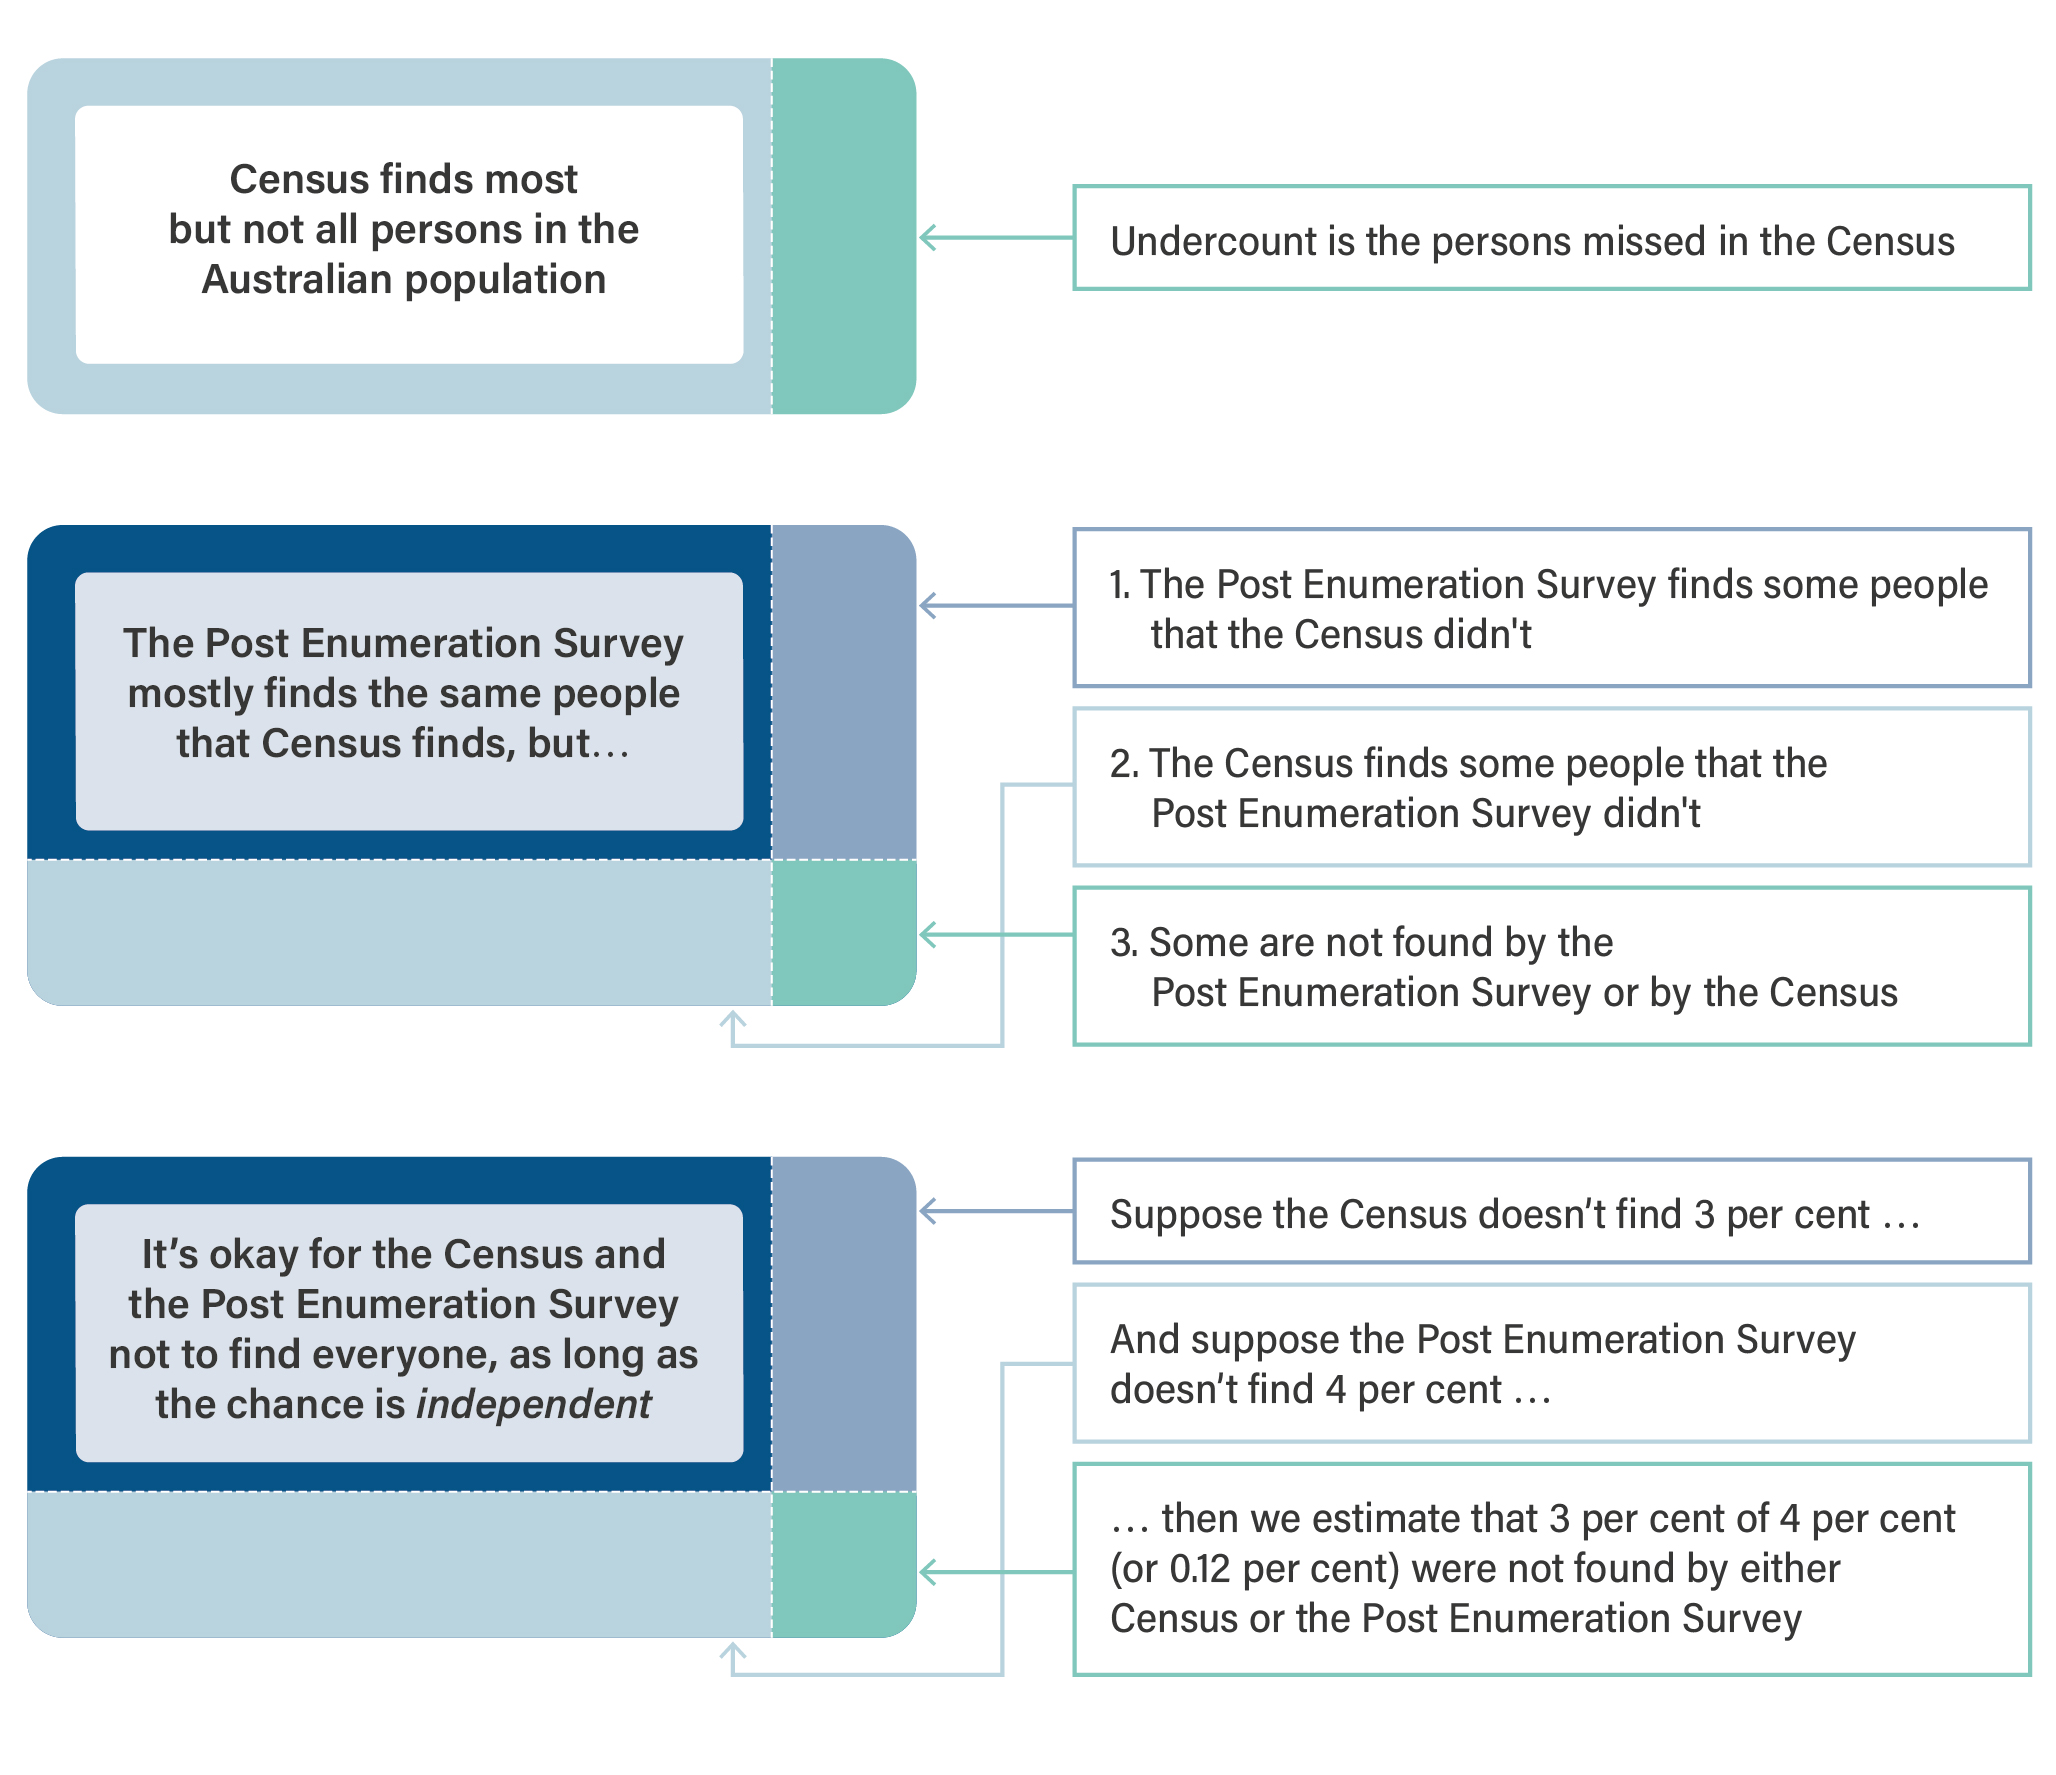 A diagram illustrating how the Census and the Post Enumeration Survey are used to provide estimates of Australia's population as described in the paragraphs above and the description for this image.